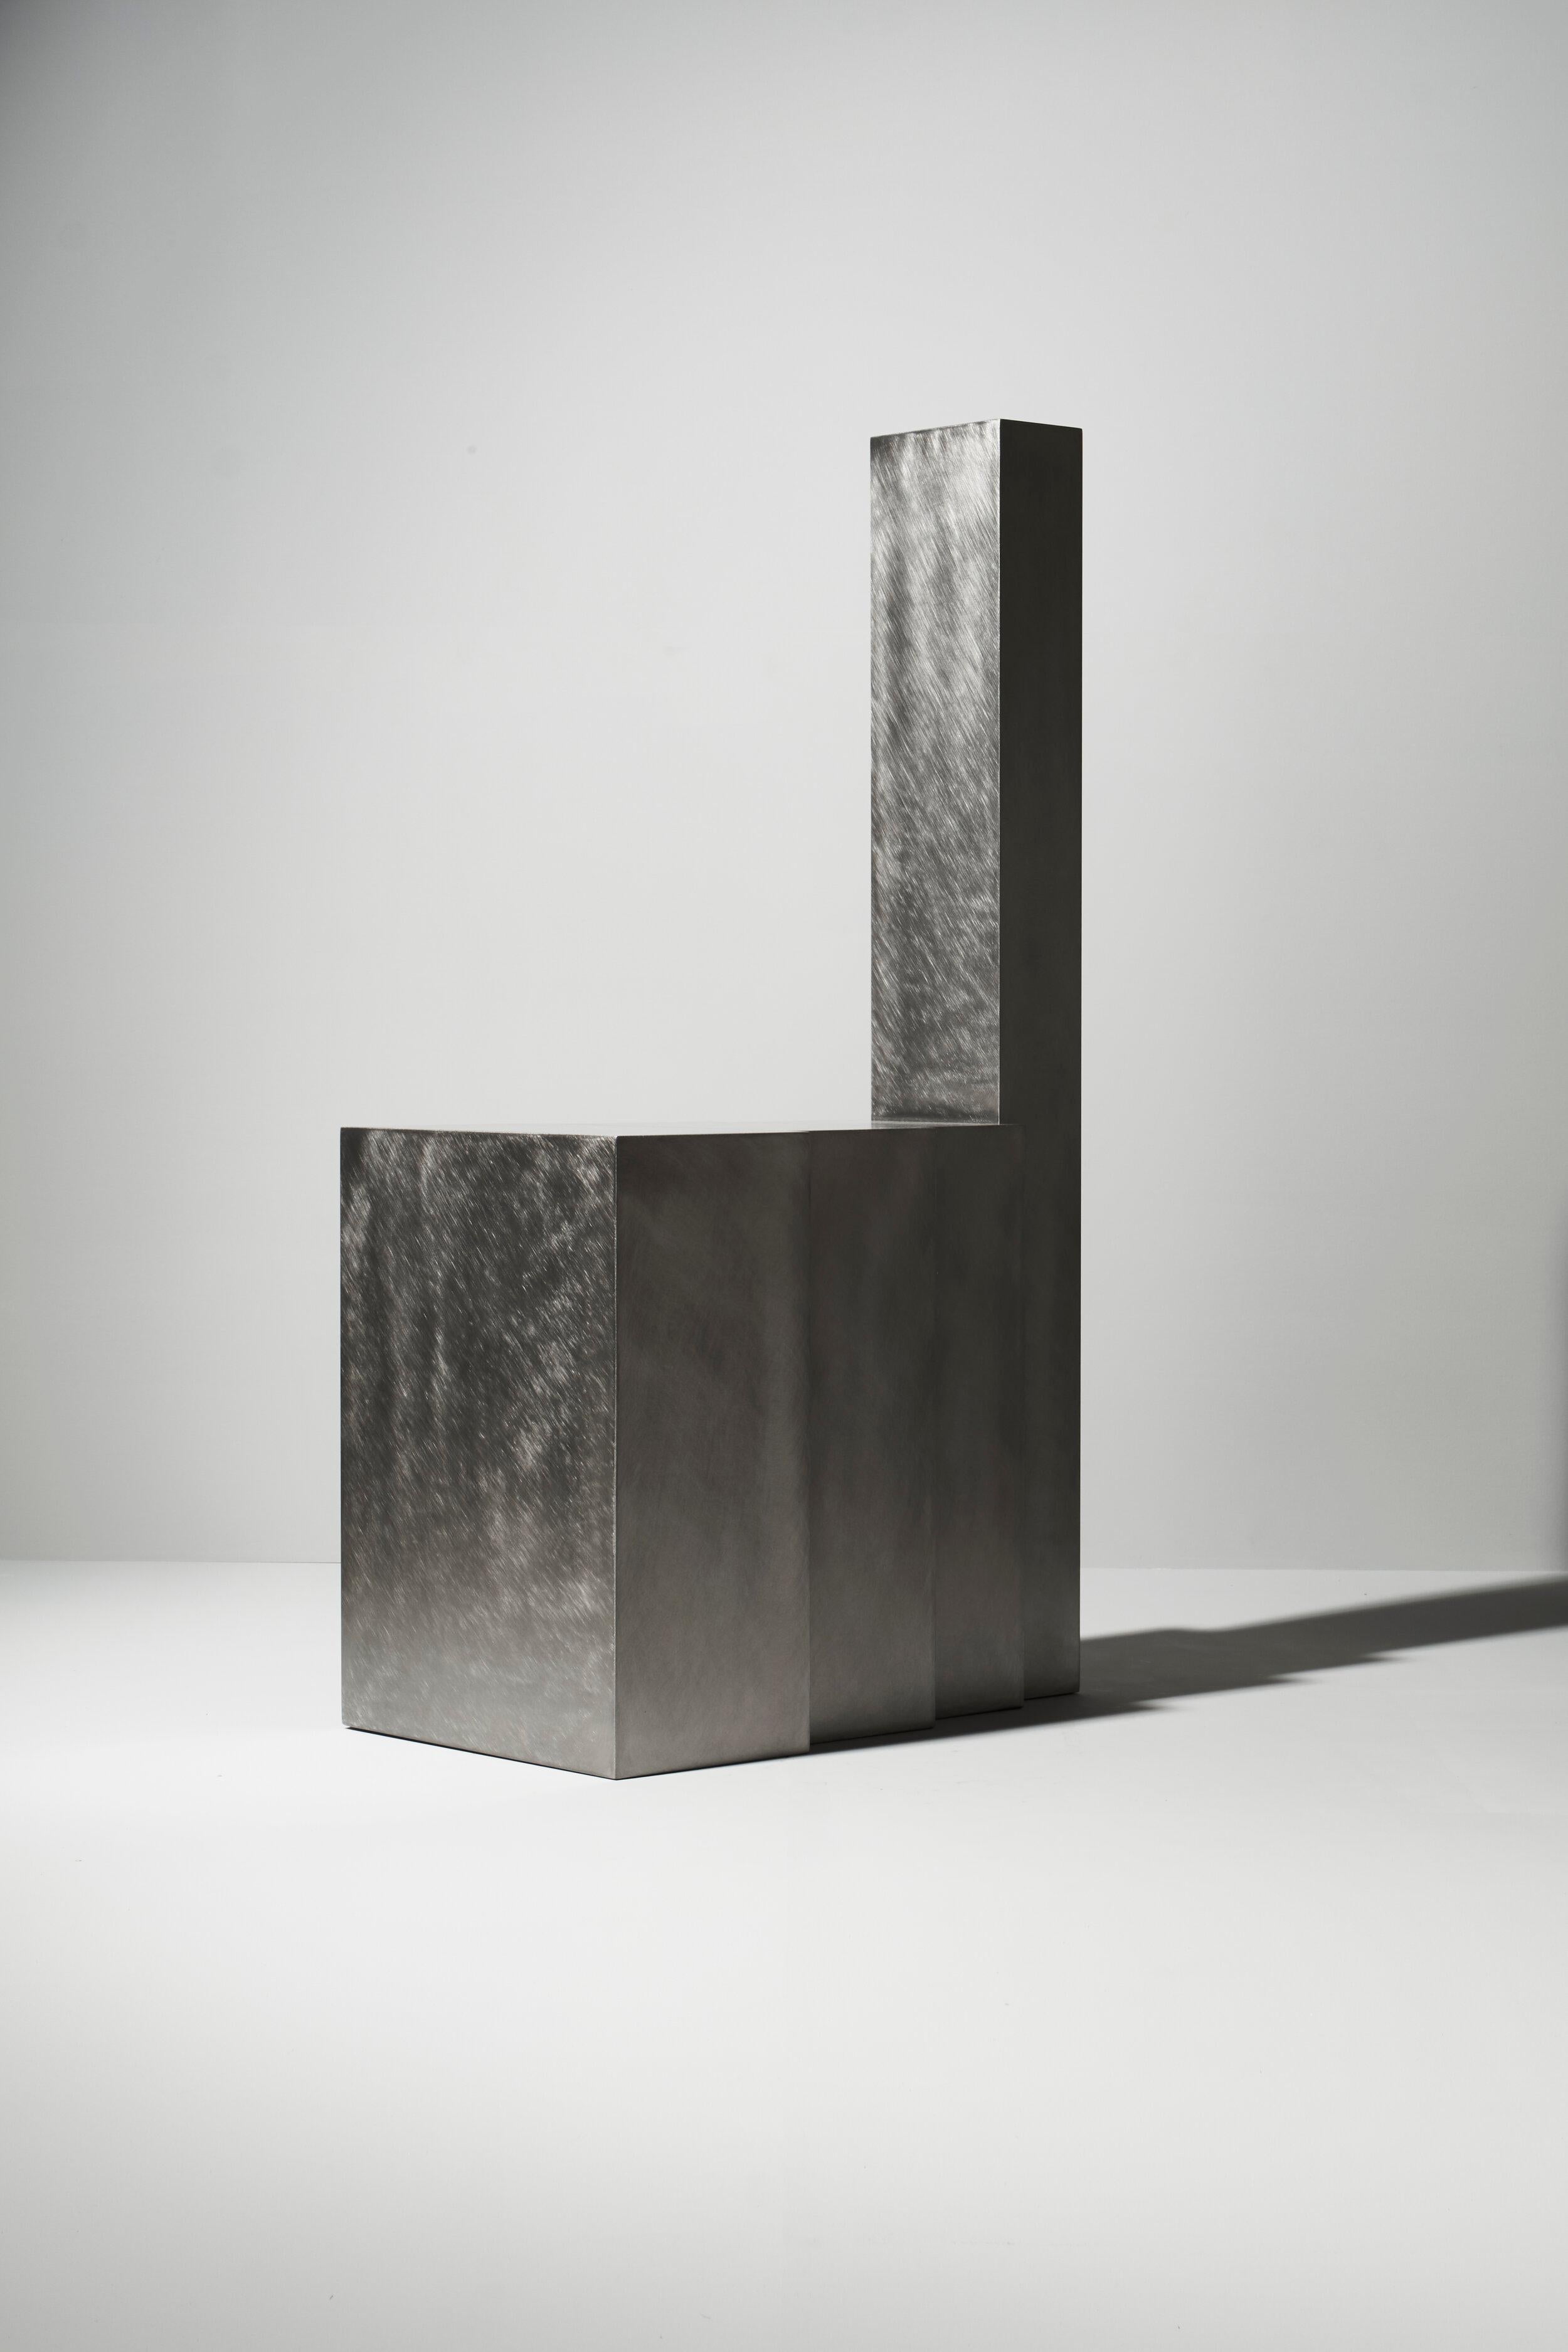 Layered steel seat III by Hyungshin Hwang
Dimensions: D 33 x W 54 x H 99 cm
Materials: stainless steel

Layered Series is the main theme and concept of work of Hwang, who continues his experiment which is based on architectural composition of